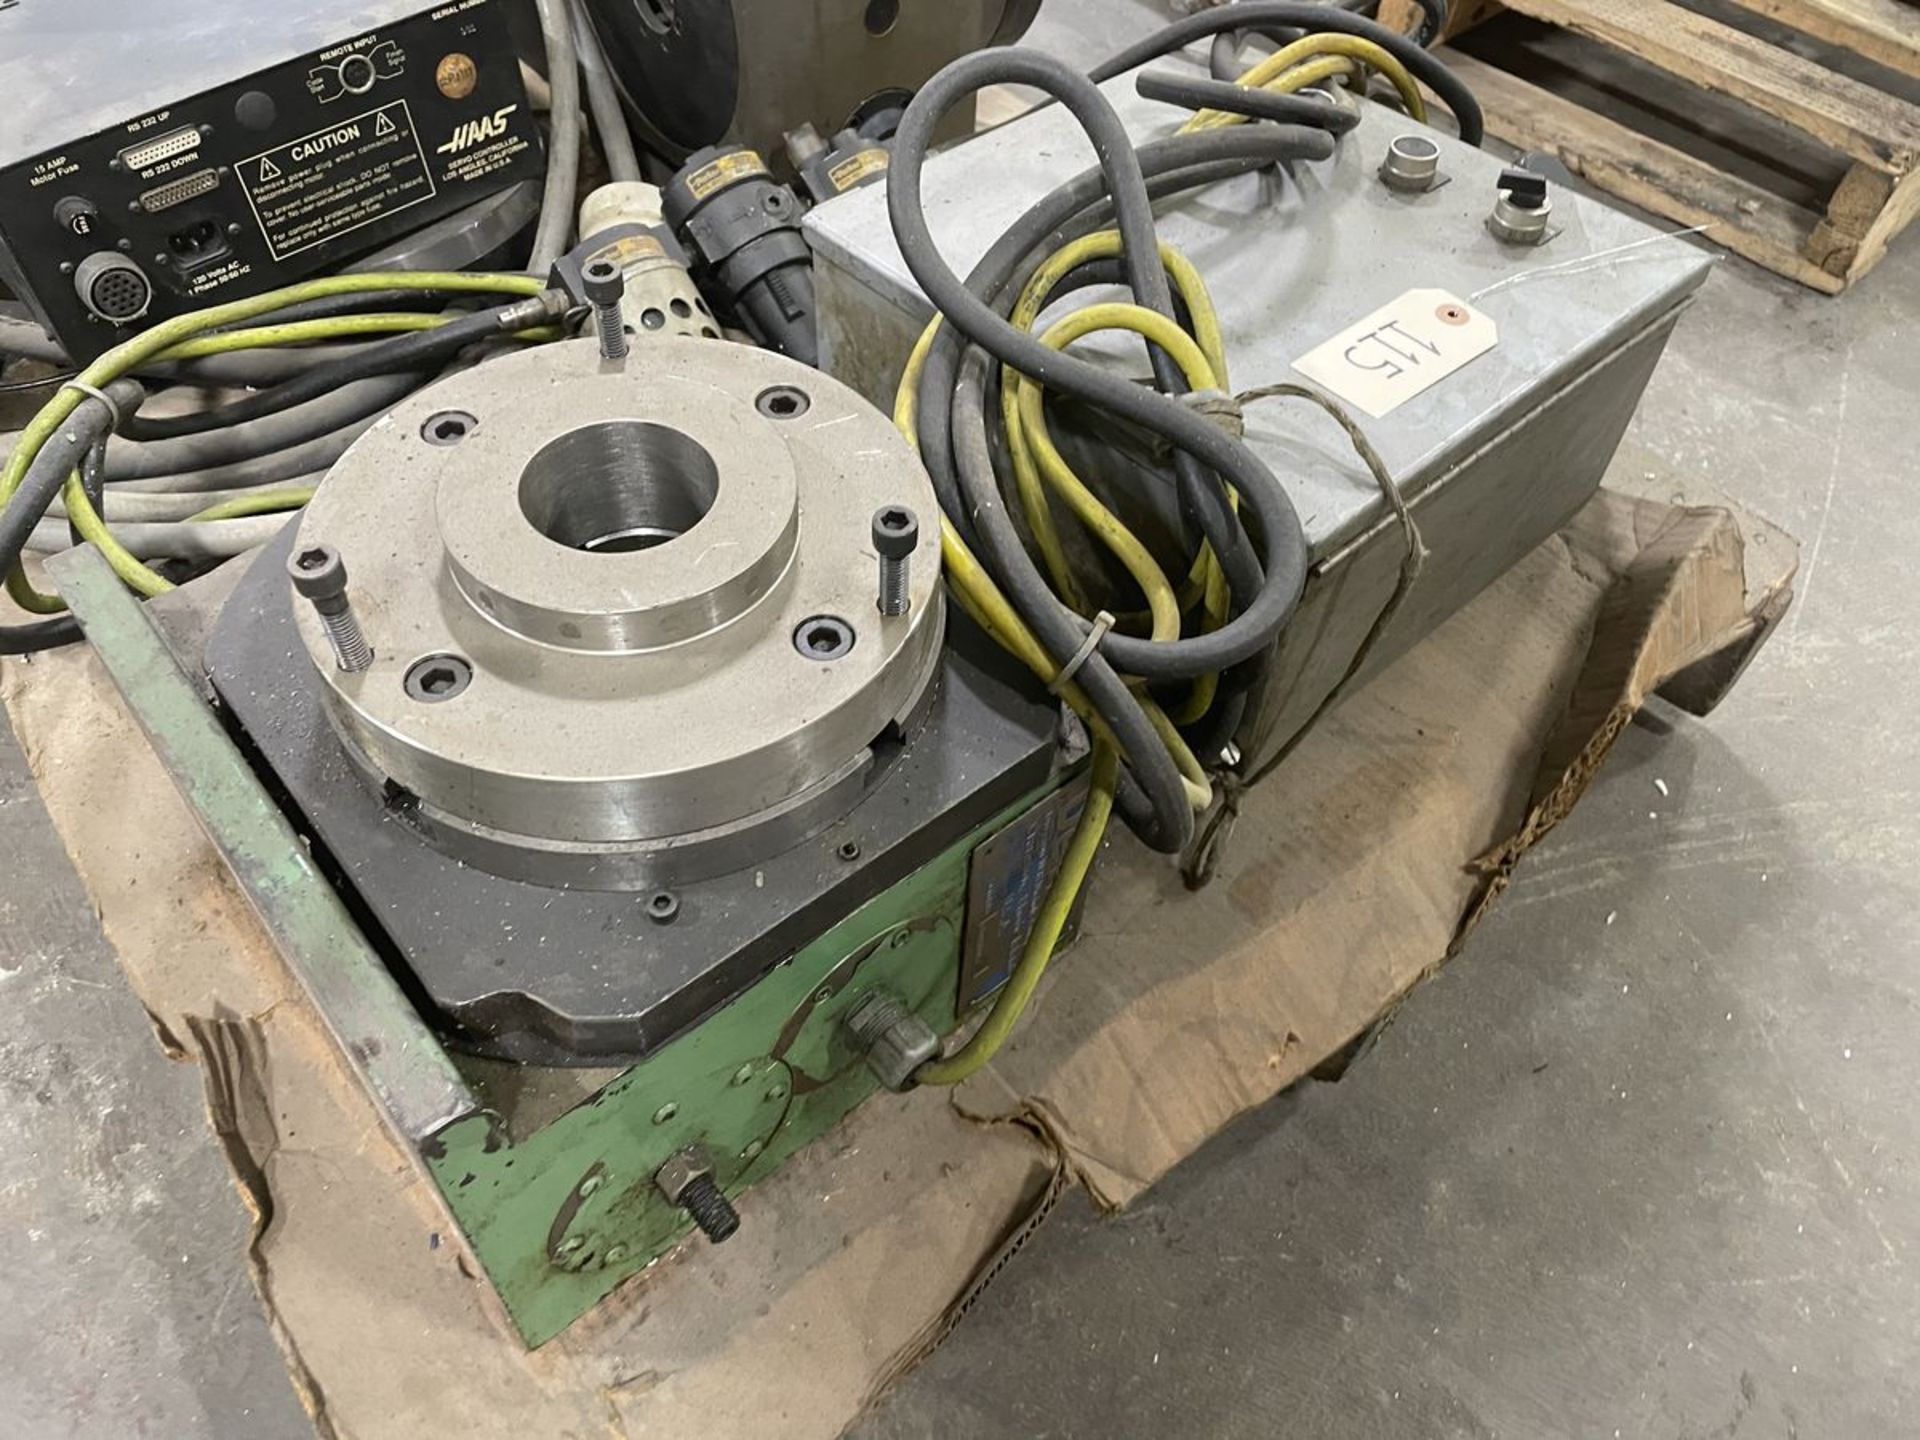 DeHoff 8” Powered Rotary Table w/ Control Box (Missing Pendant Control) - Image 2 of 3